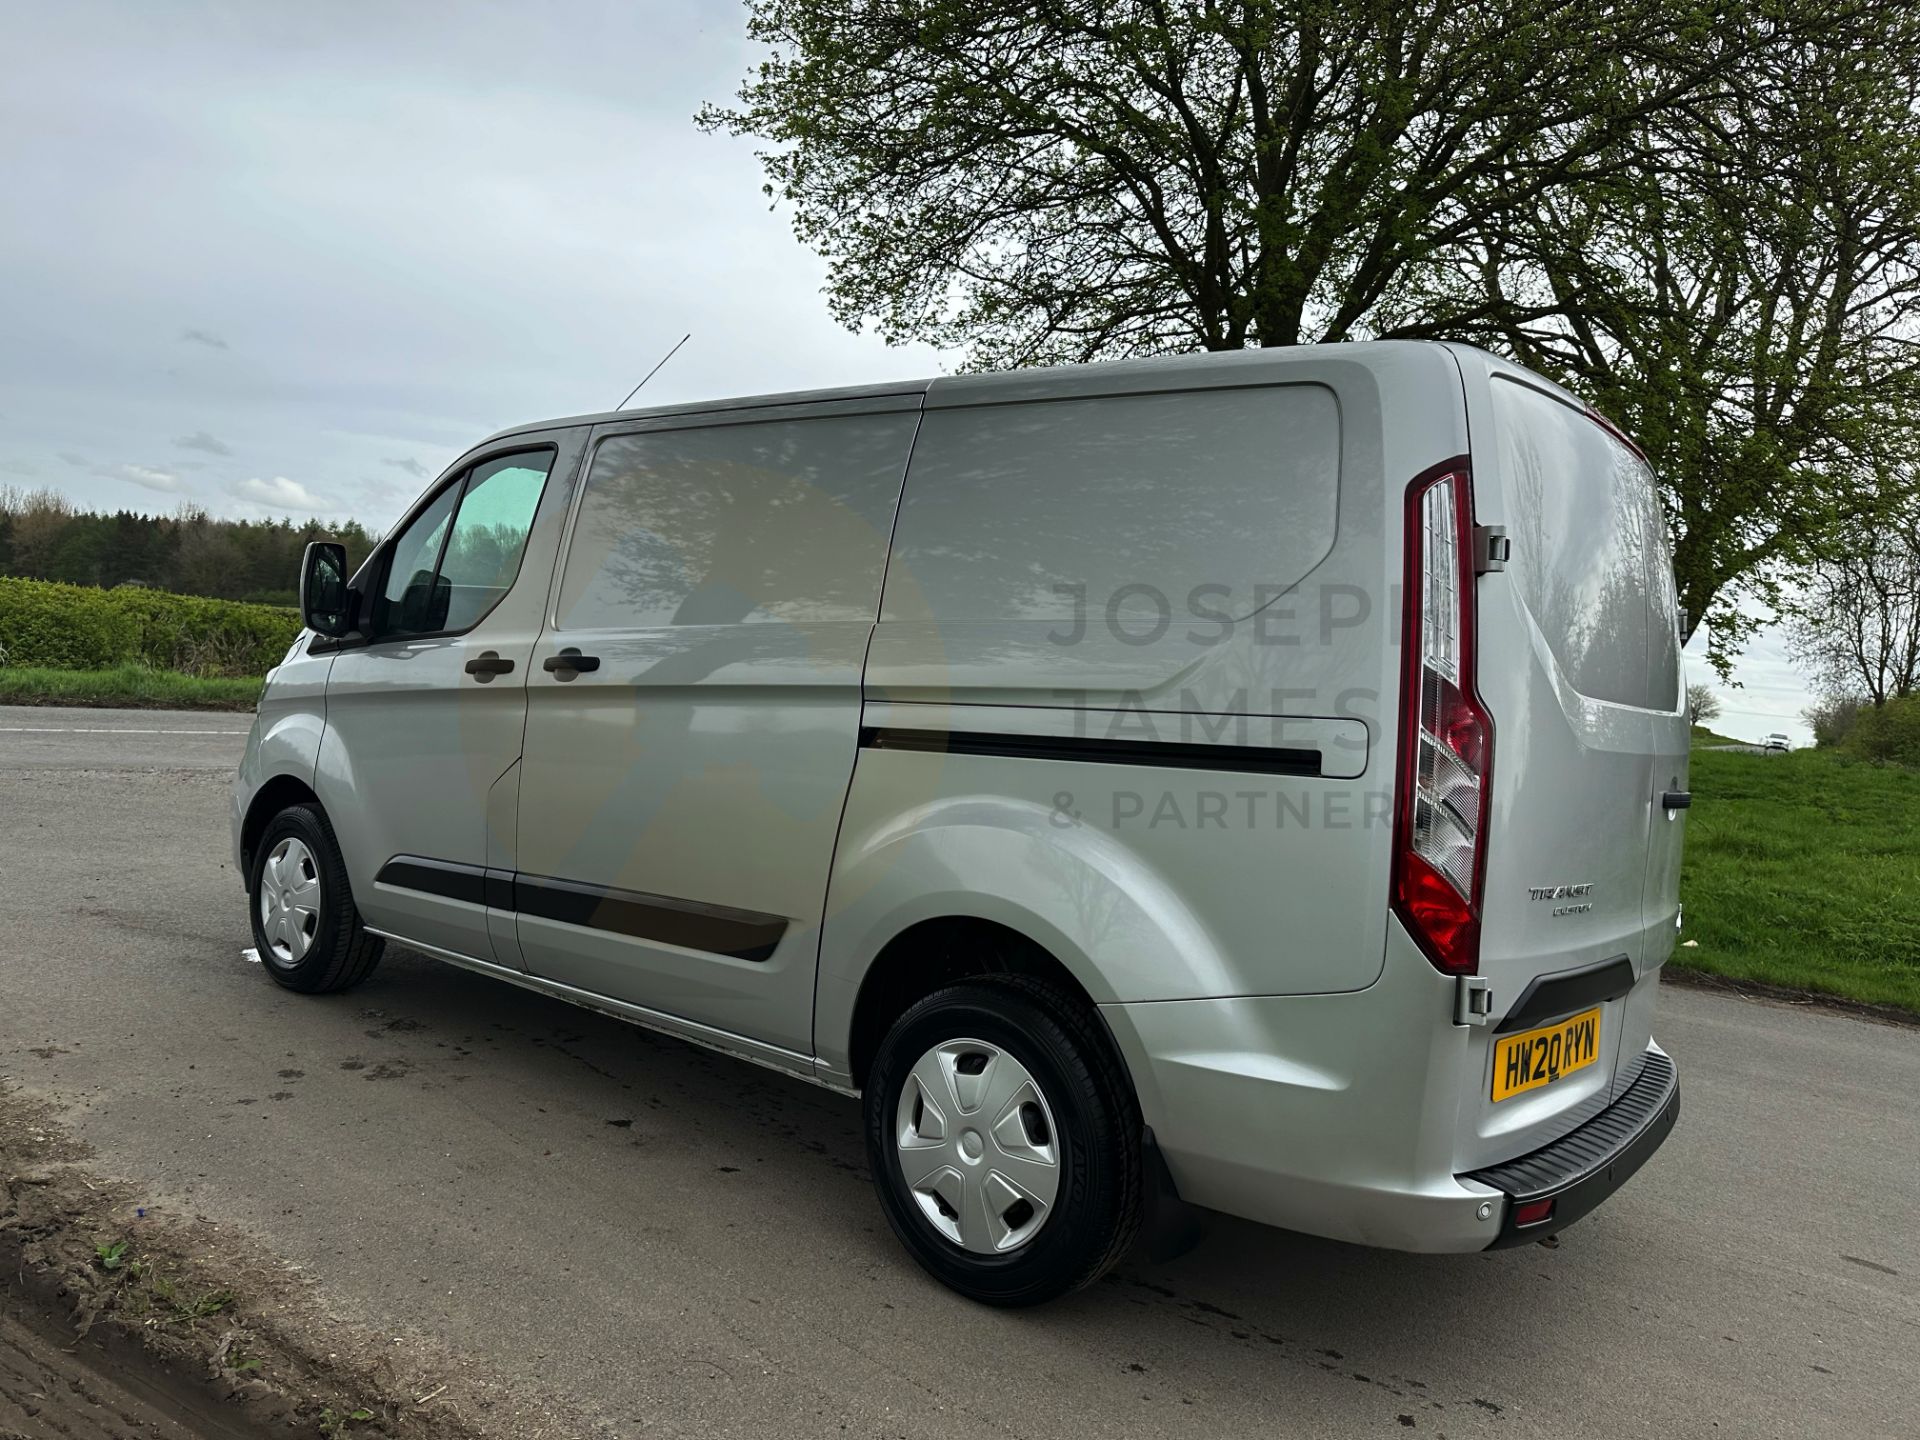 FORD TRANSIT CUSTOM "TREND" 2.0TDCI (130) 20 REG -1 OWNER- SILVER -GREAT SPEC -LOW MILEAGE - Image 10 of 38